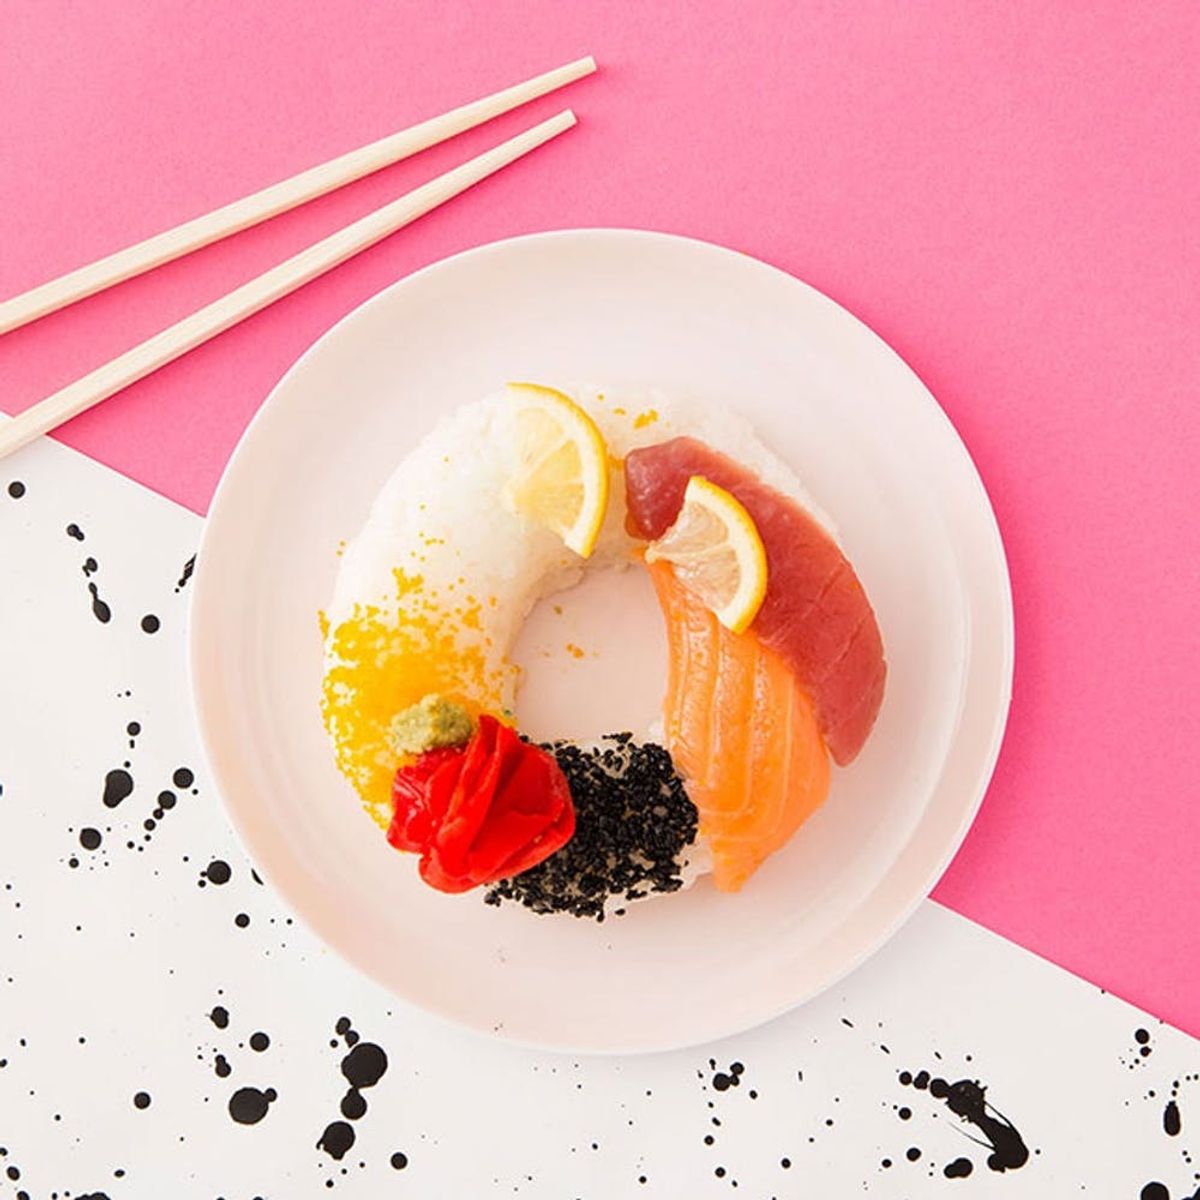 Food Hybrid: Here’s Our Take on Internet Sensation Sushi Donuts